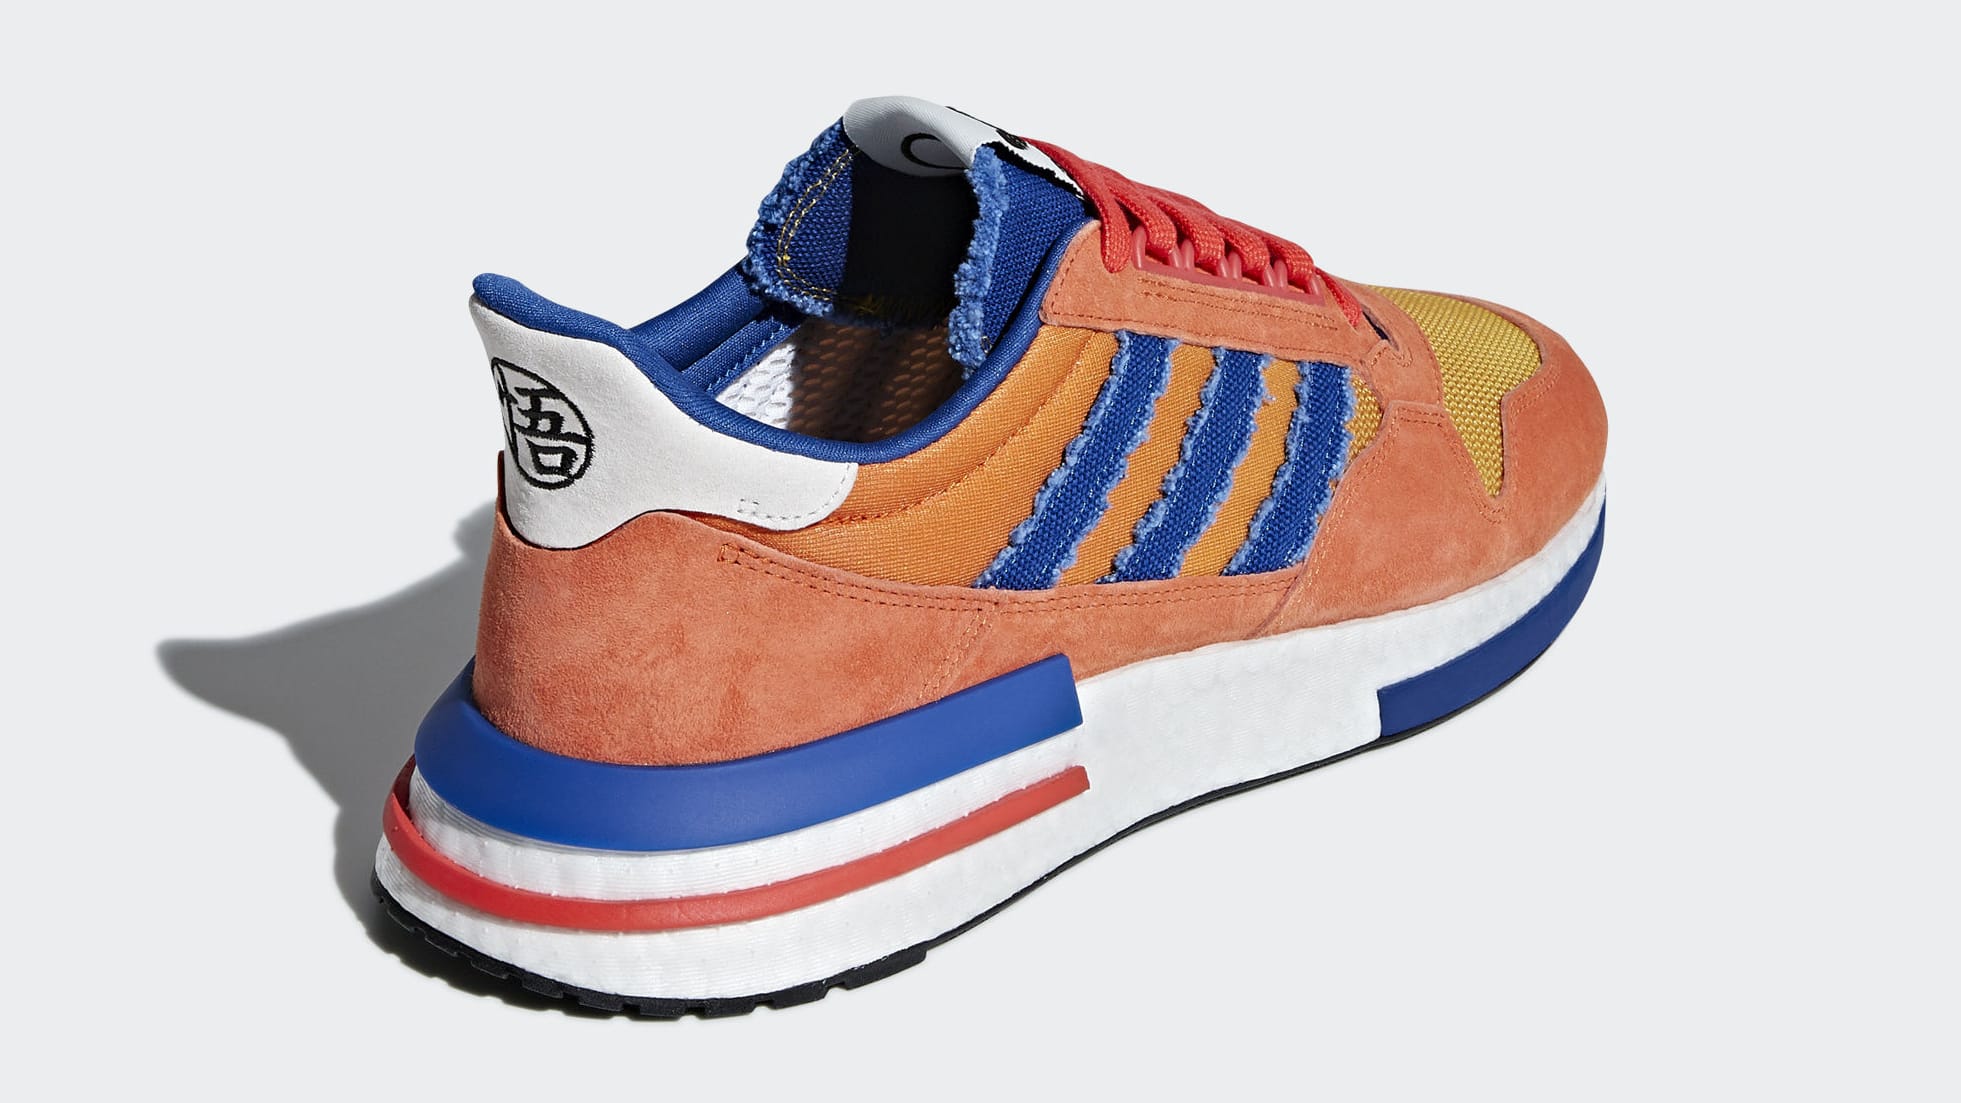 Dragon Ball Z X Adidas Goku Frieza Collection Release Date D97046 D97048 Sole Collector